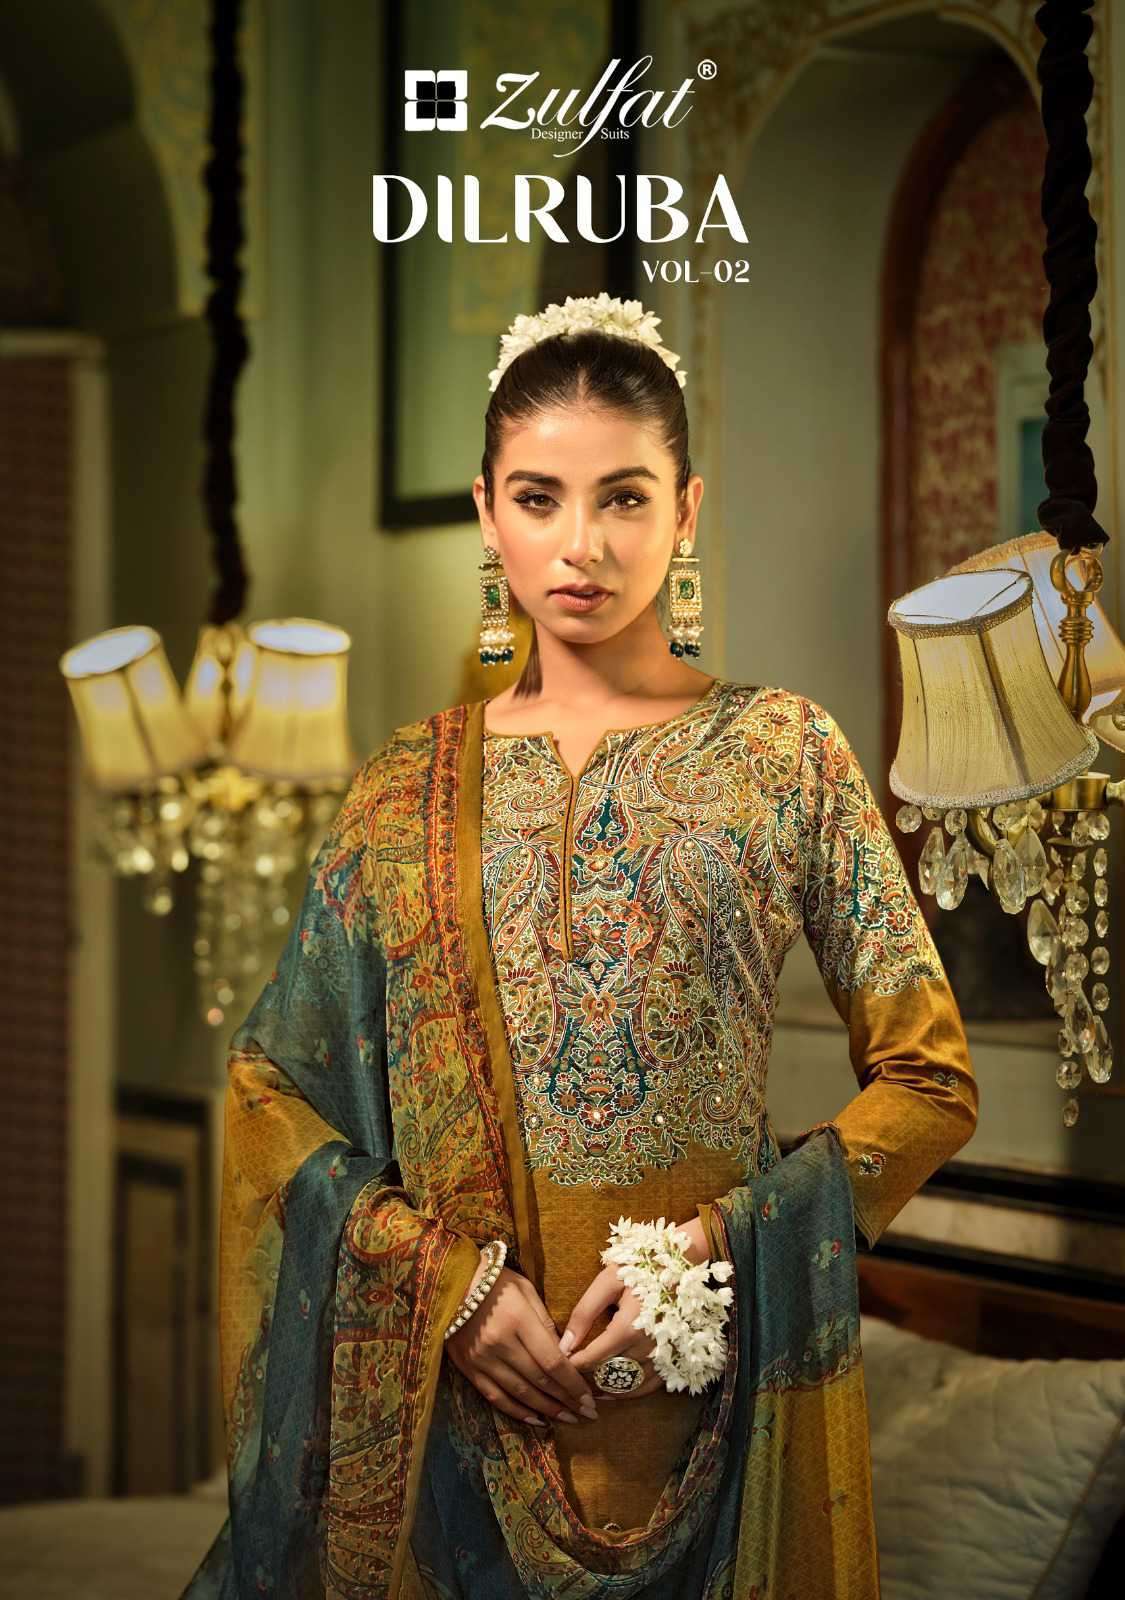 Zulfat Designer Suits Dilruba Vol 2 Cotton With Embroidery Work Ethenic Wear Salwar Suits At Wholesale Price